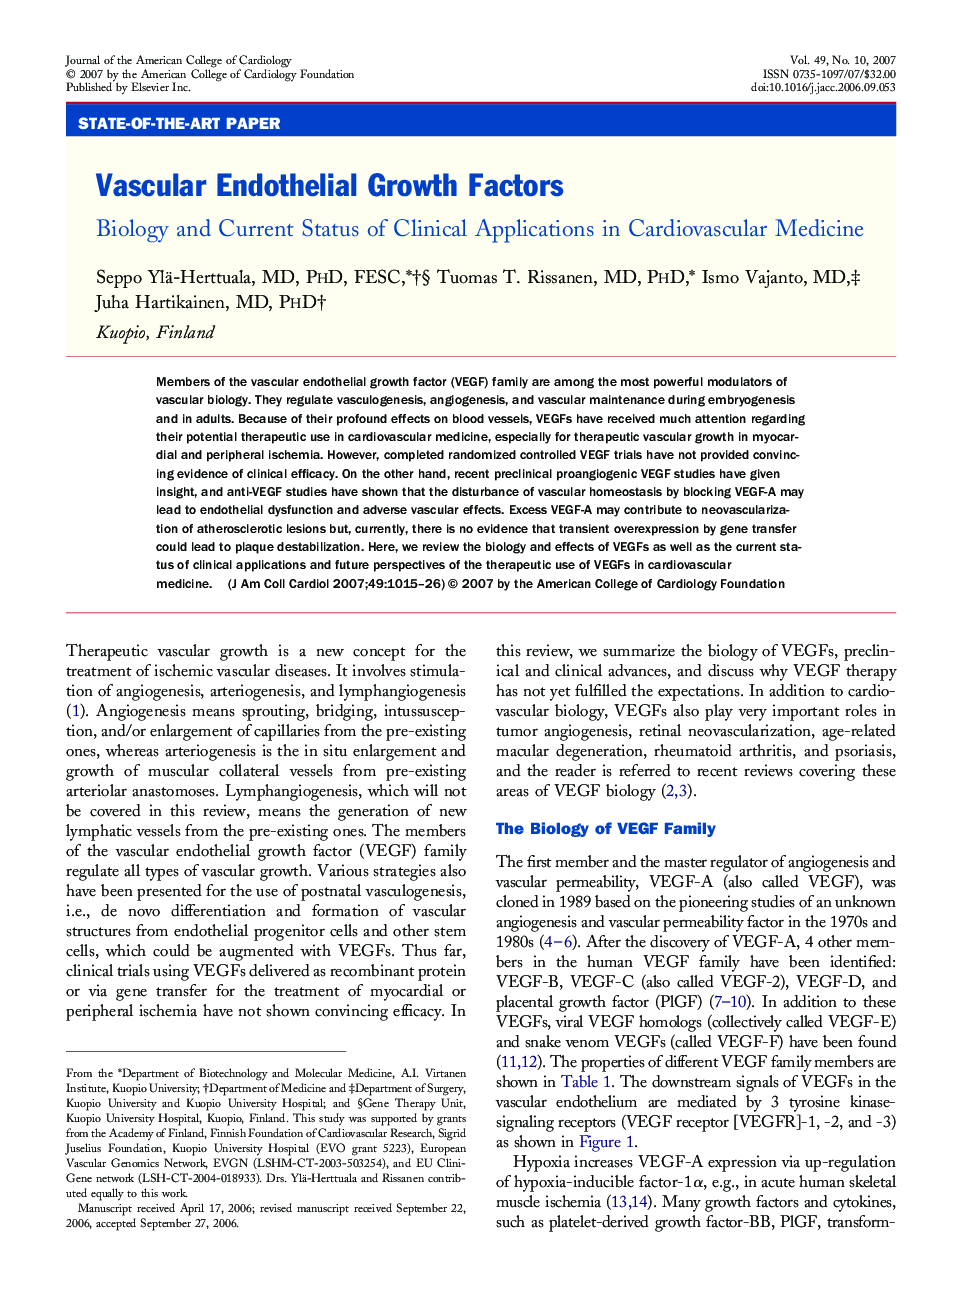 Vascular Endothelial Growth Factors : Biology and Current Status of Clinical Applications in Cardiovascular Medicine